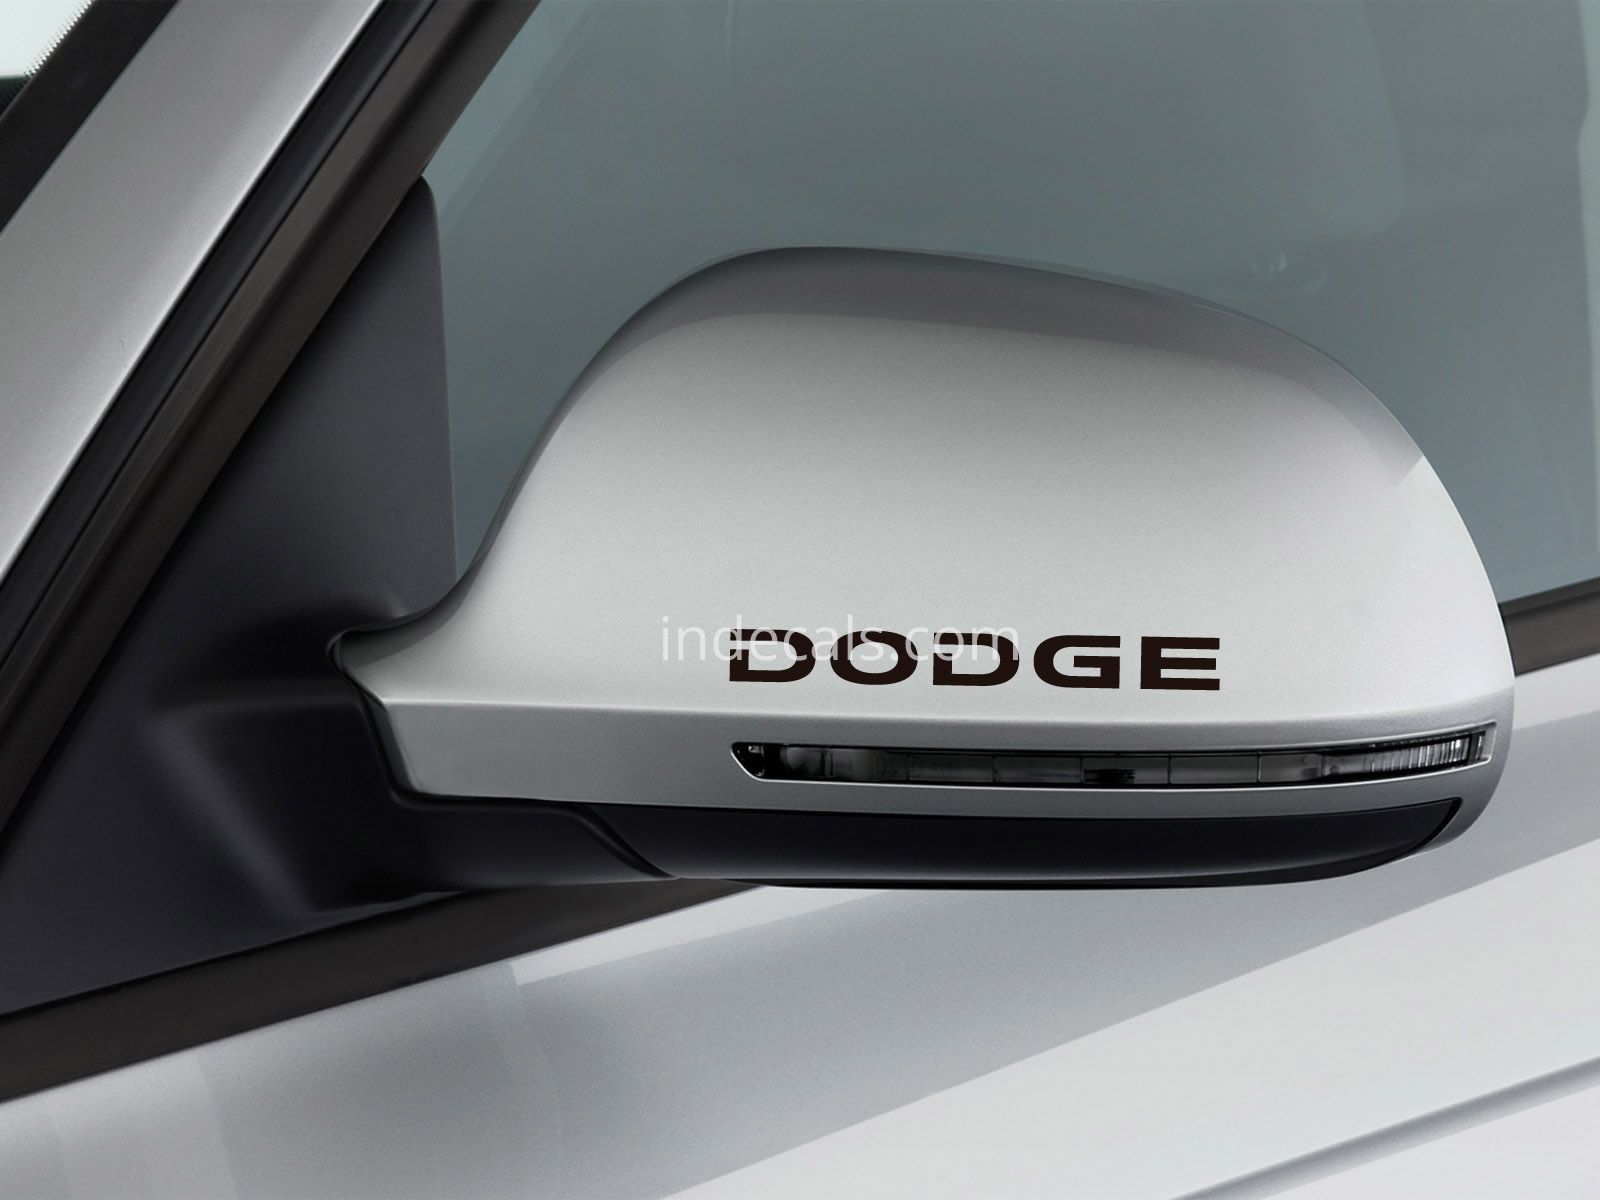 3 x Dodge Stickers for Mirrors - Black